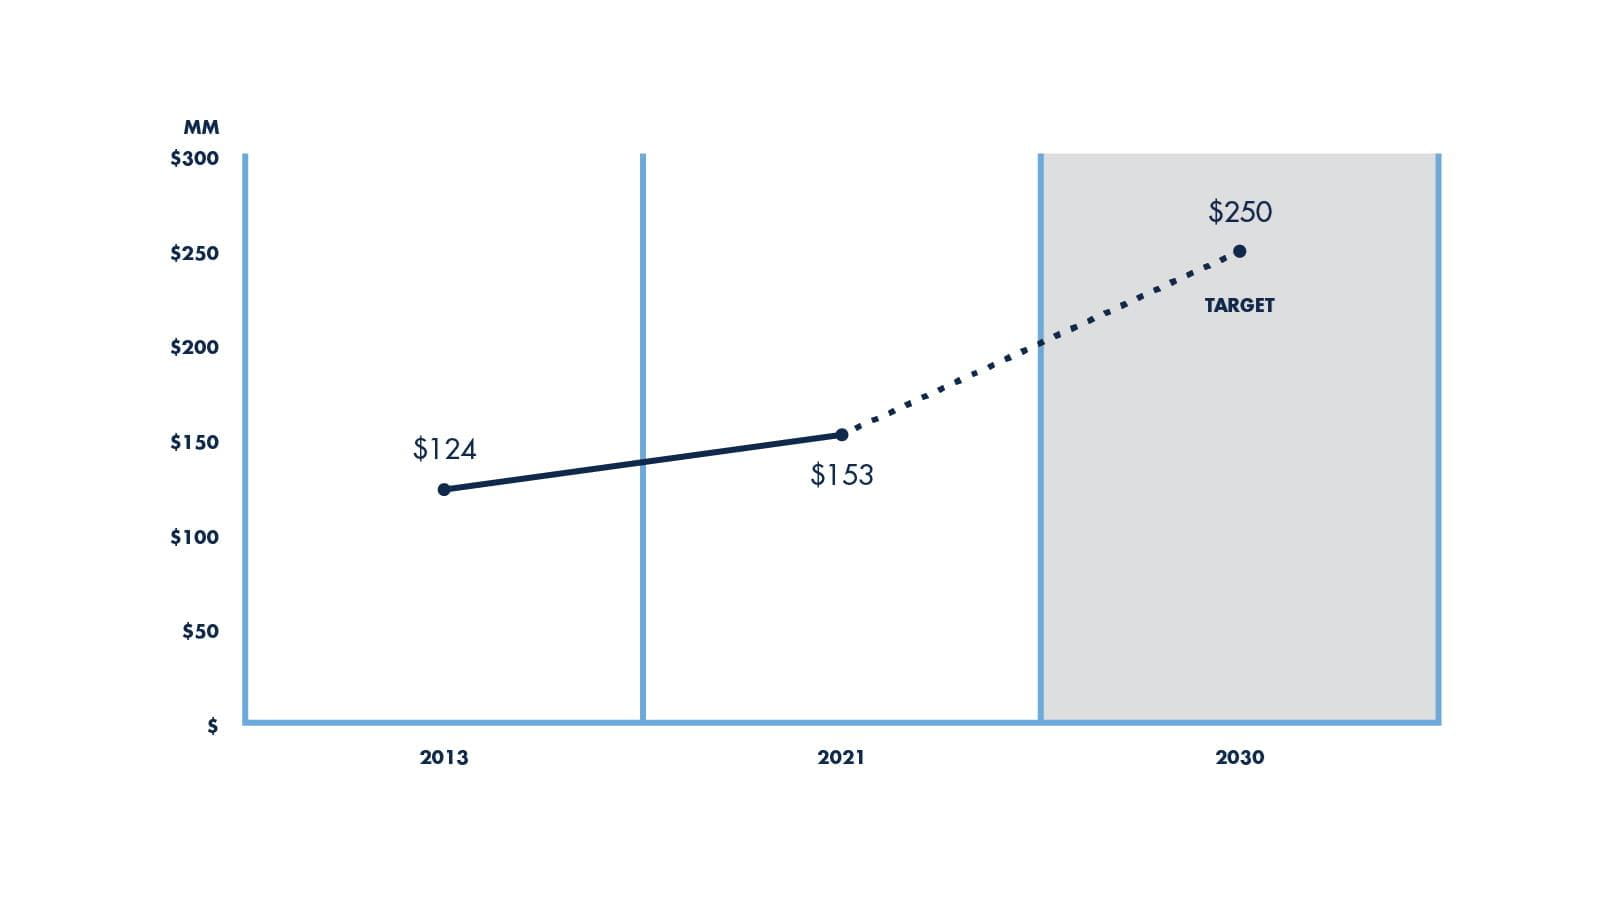 Line graph showing Drexel University total research expenditures in millions of dollars. The value for 2013 is $124. The value for 2021 is $153. The target value for 2030 is $250.